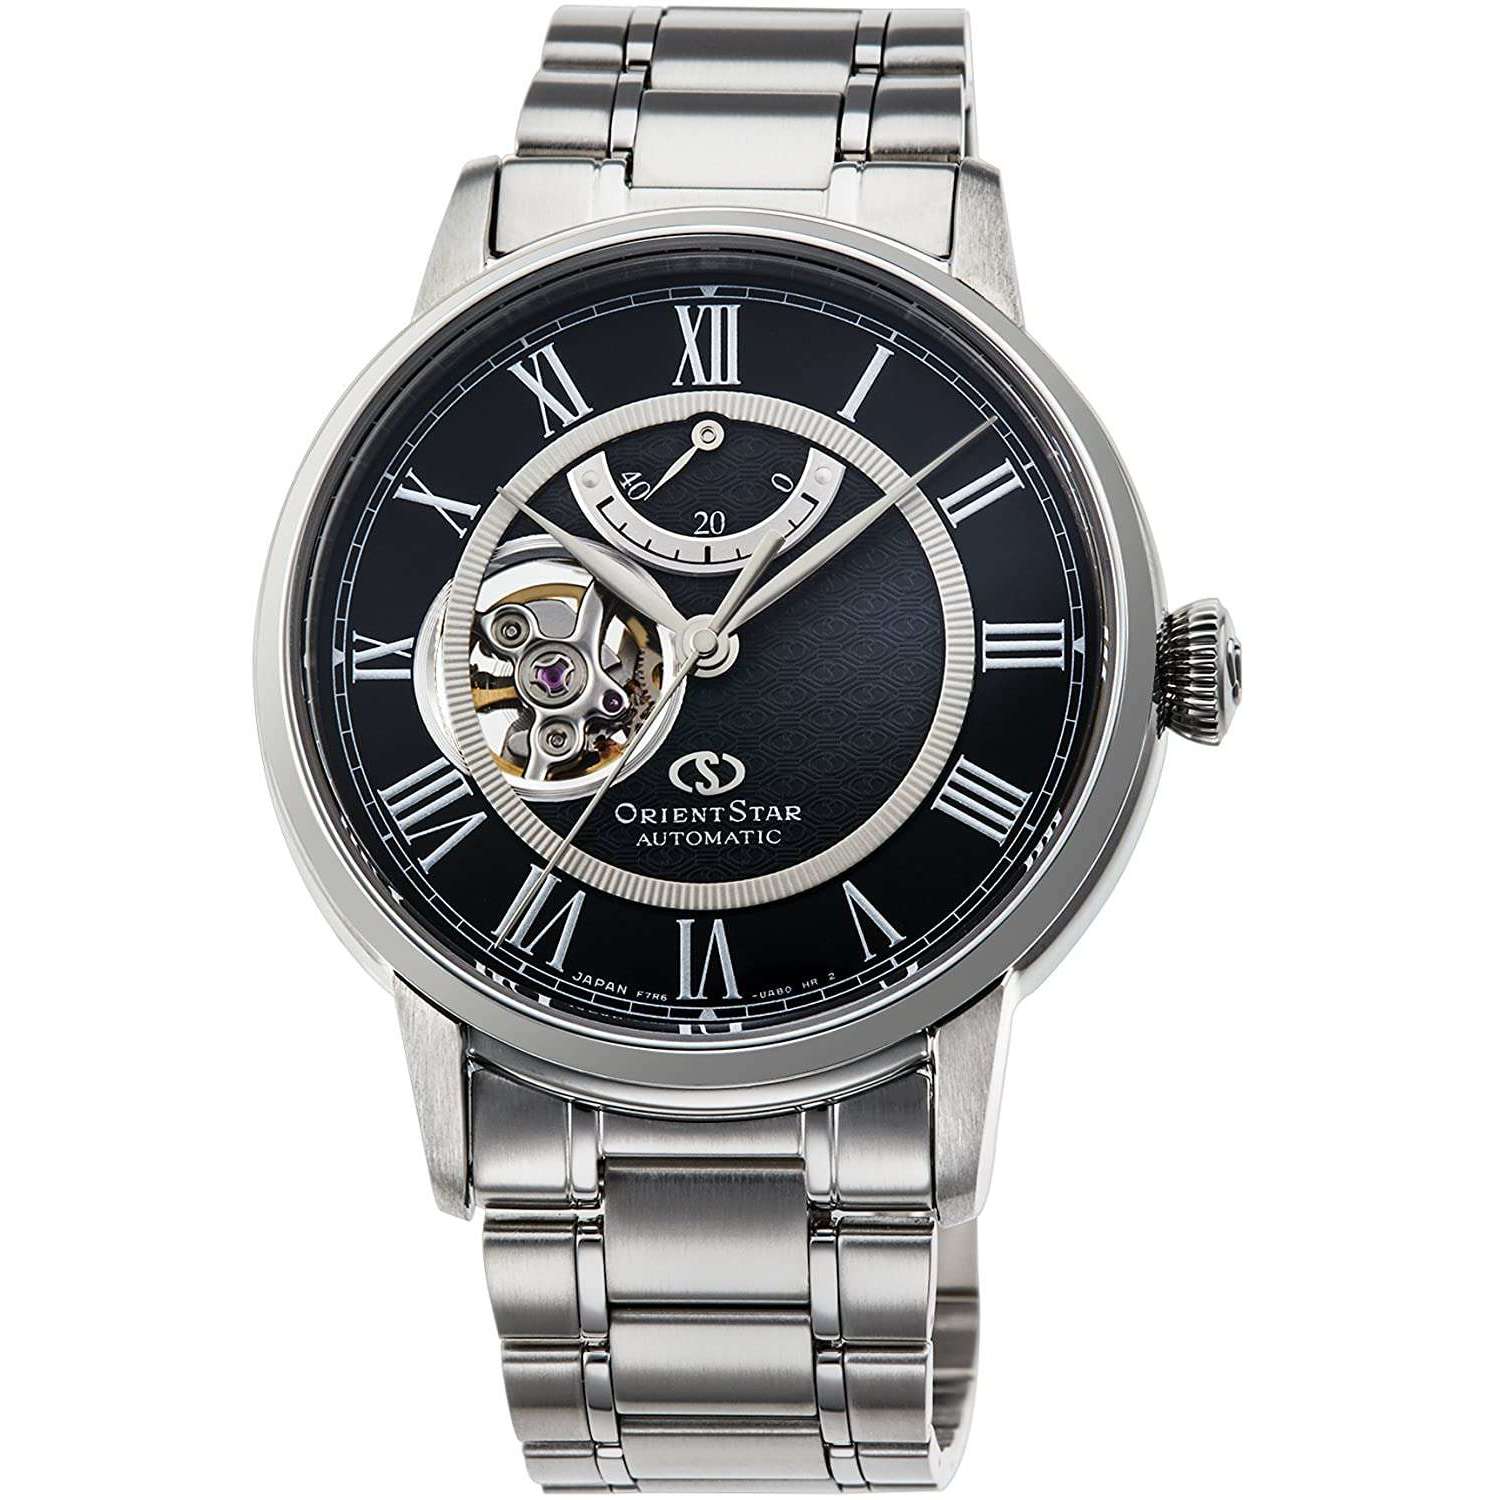 ORIENT STAR CLASSIC COLLECTION SEMI SKELETON (CLASSIC) MEN WATCH RK-HH0004B - ROOK JAPAN